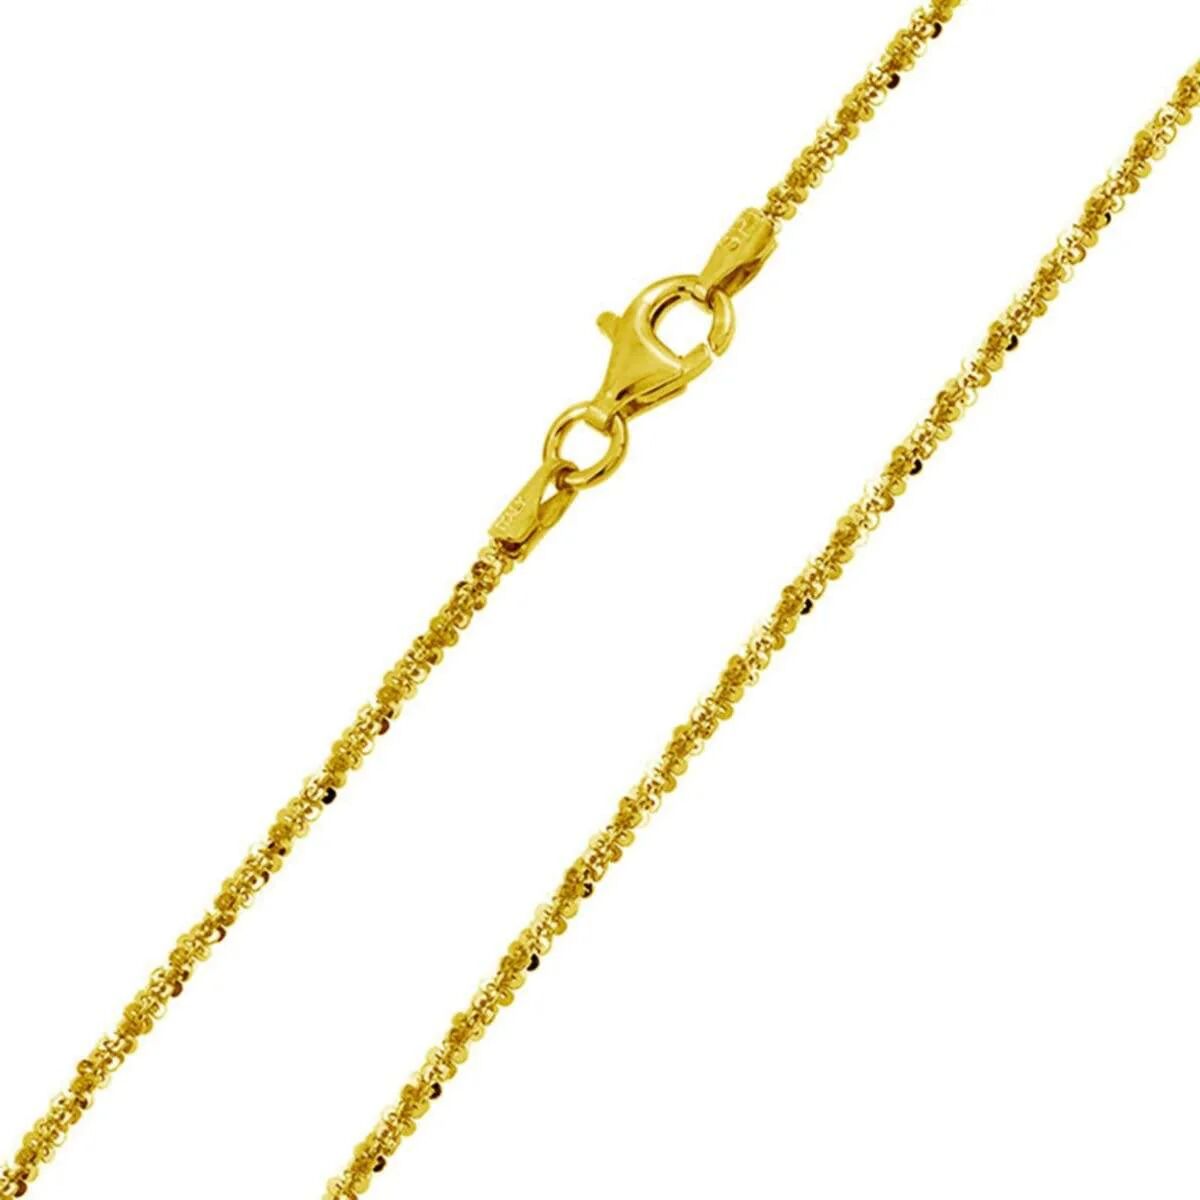 DailySale 14k Yellow Gold Over 925 Sterling Silver Margarita Chain